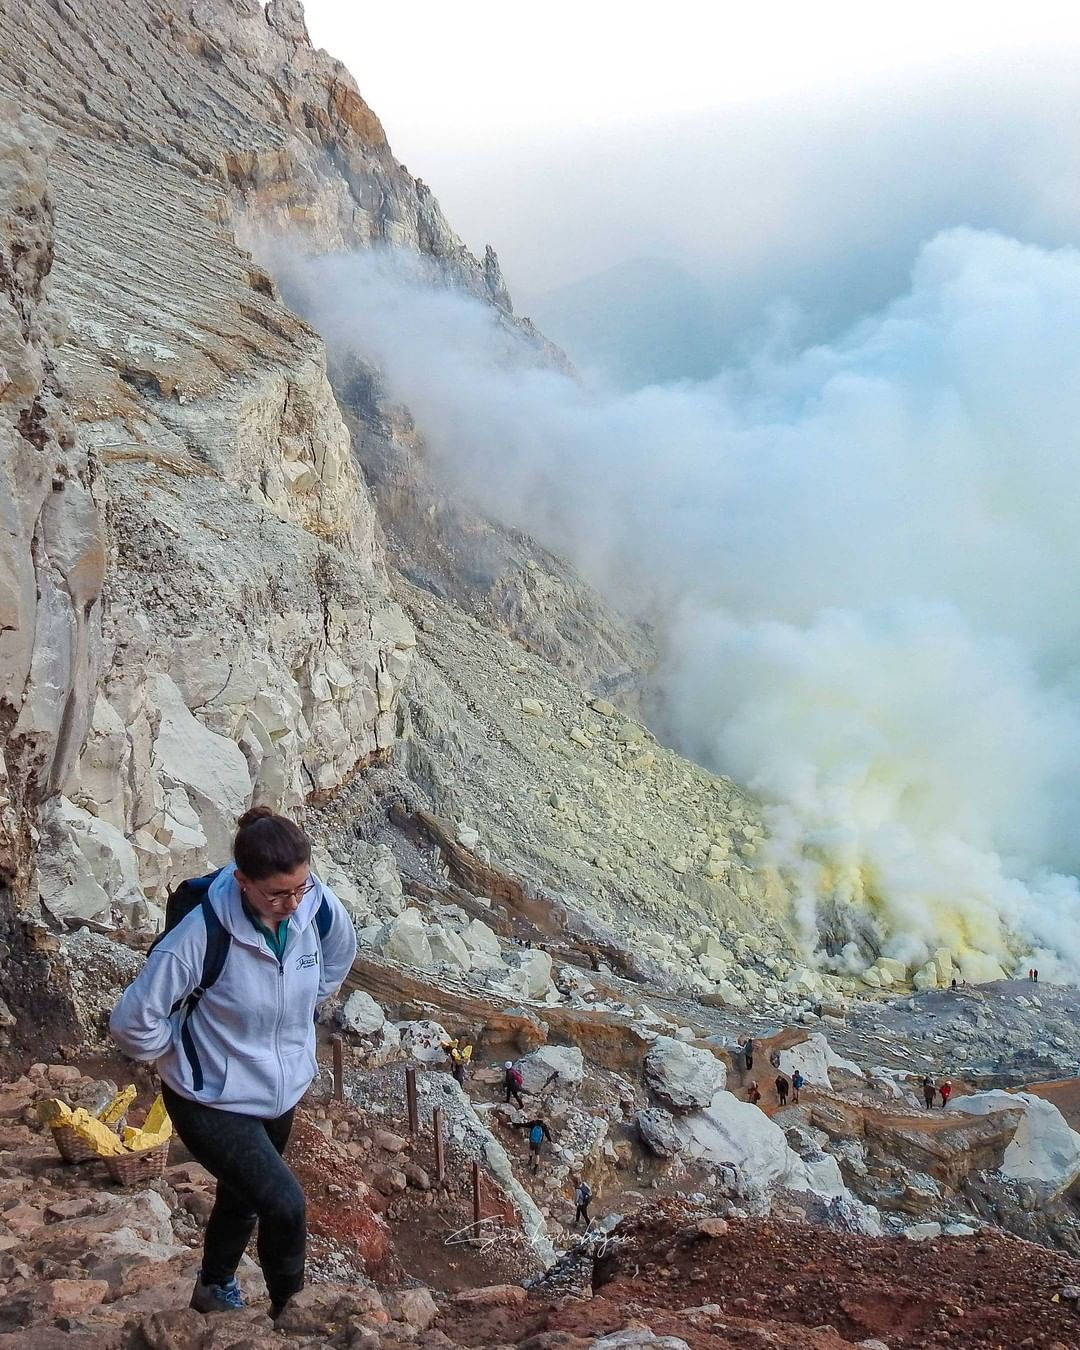 How to visit Kawah Ijen, the crater with amazing blue fire